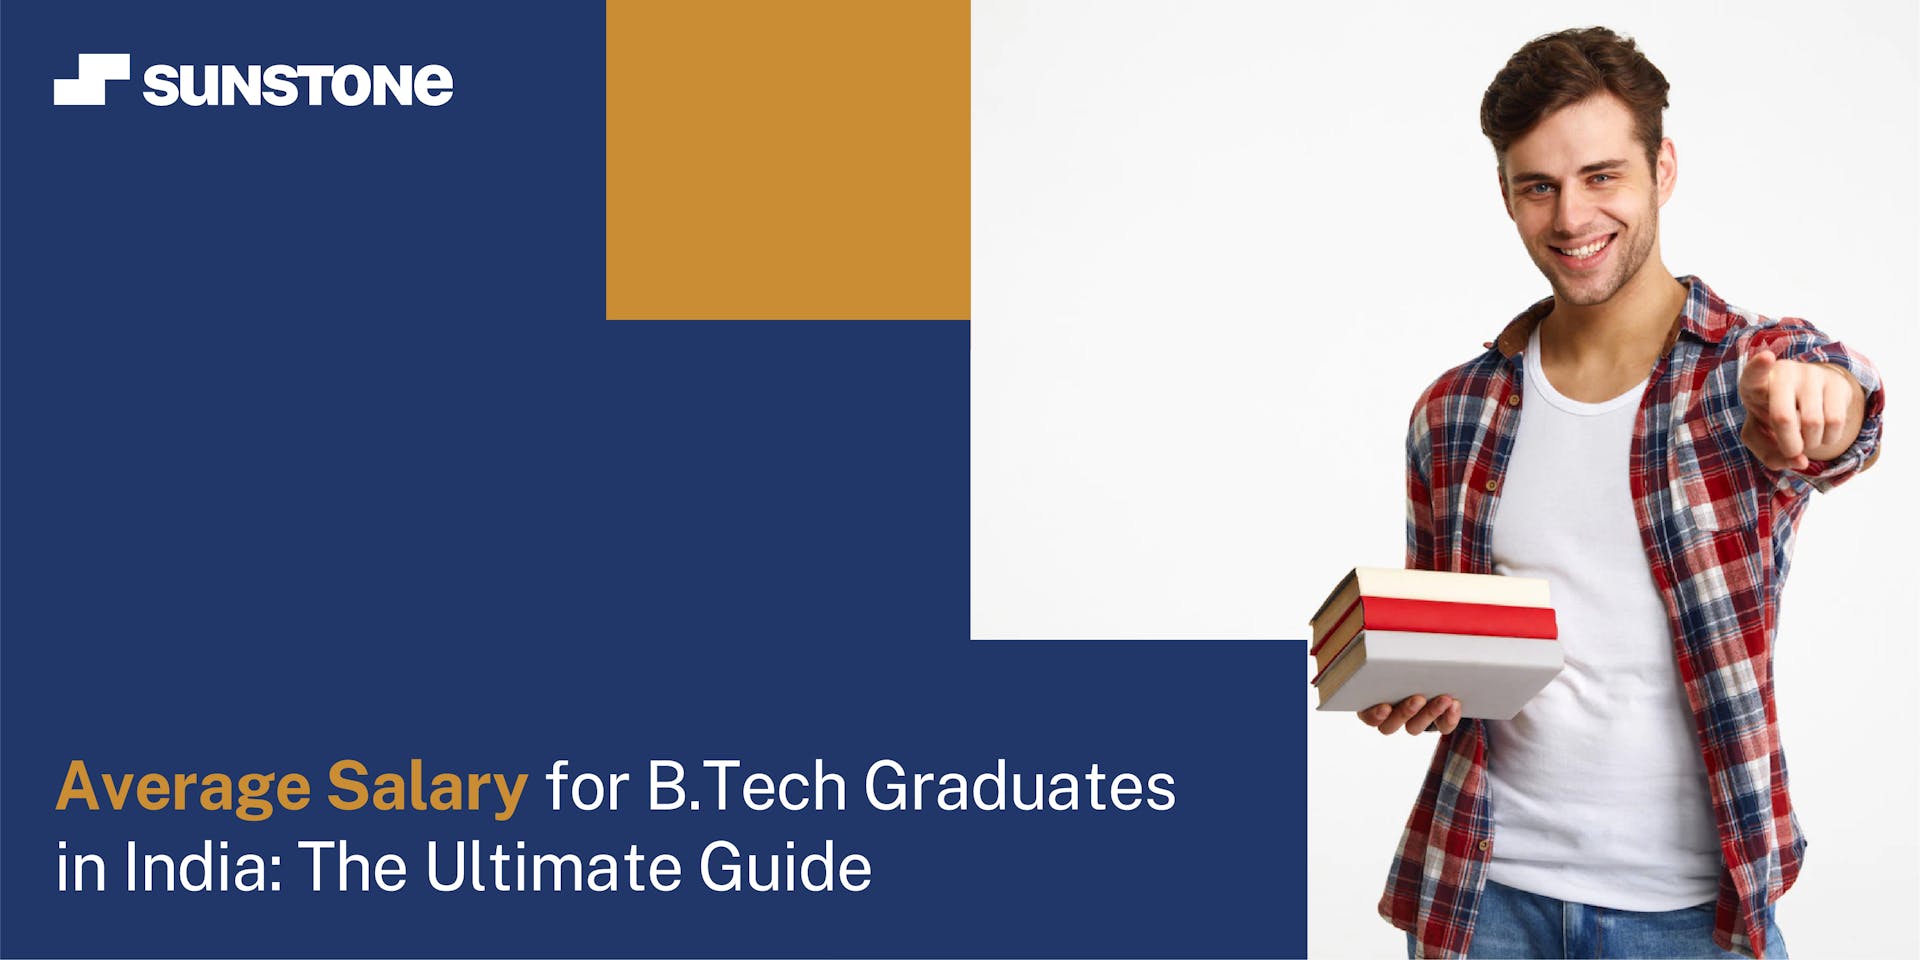 Average Salary for B.Tech Graduates in India: The Ultimate Guide